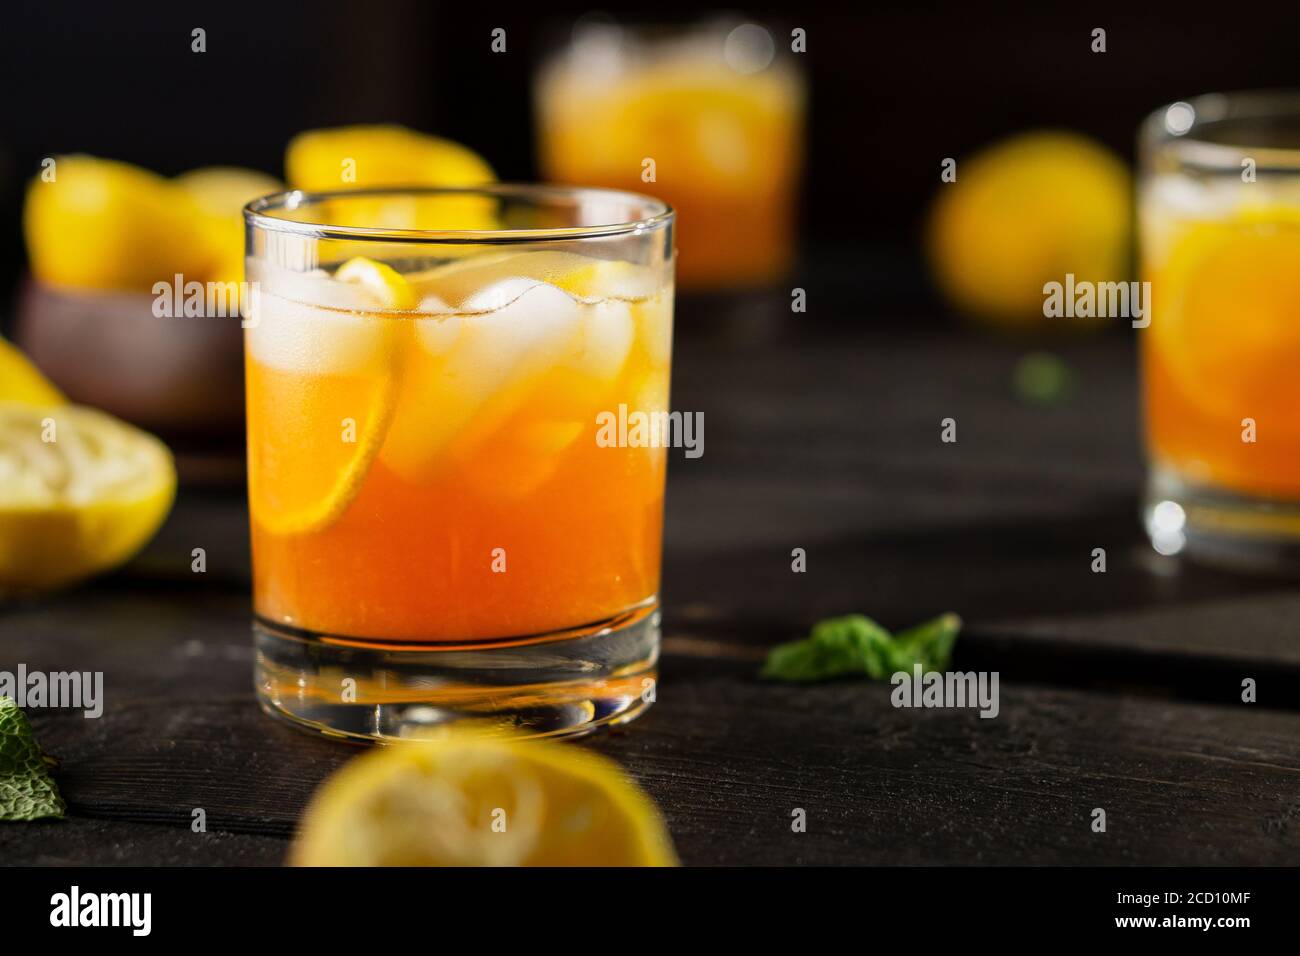 Cold drink of lemon iced tea on dark background. A refreshing summer drink made of fresh hand squeezed lemon mixed with cold black tea, ice and sugar. Stock Photo